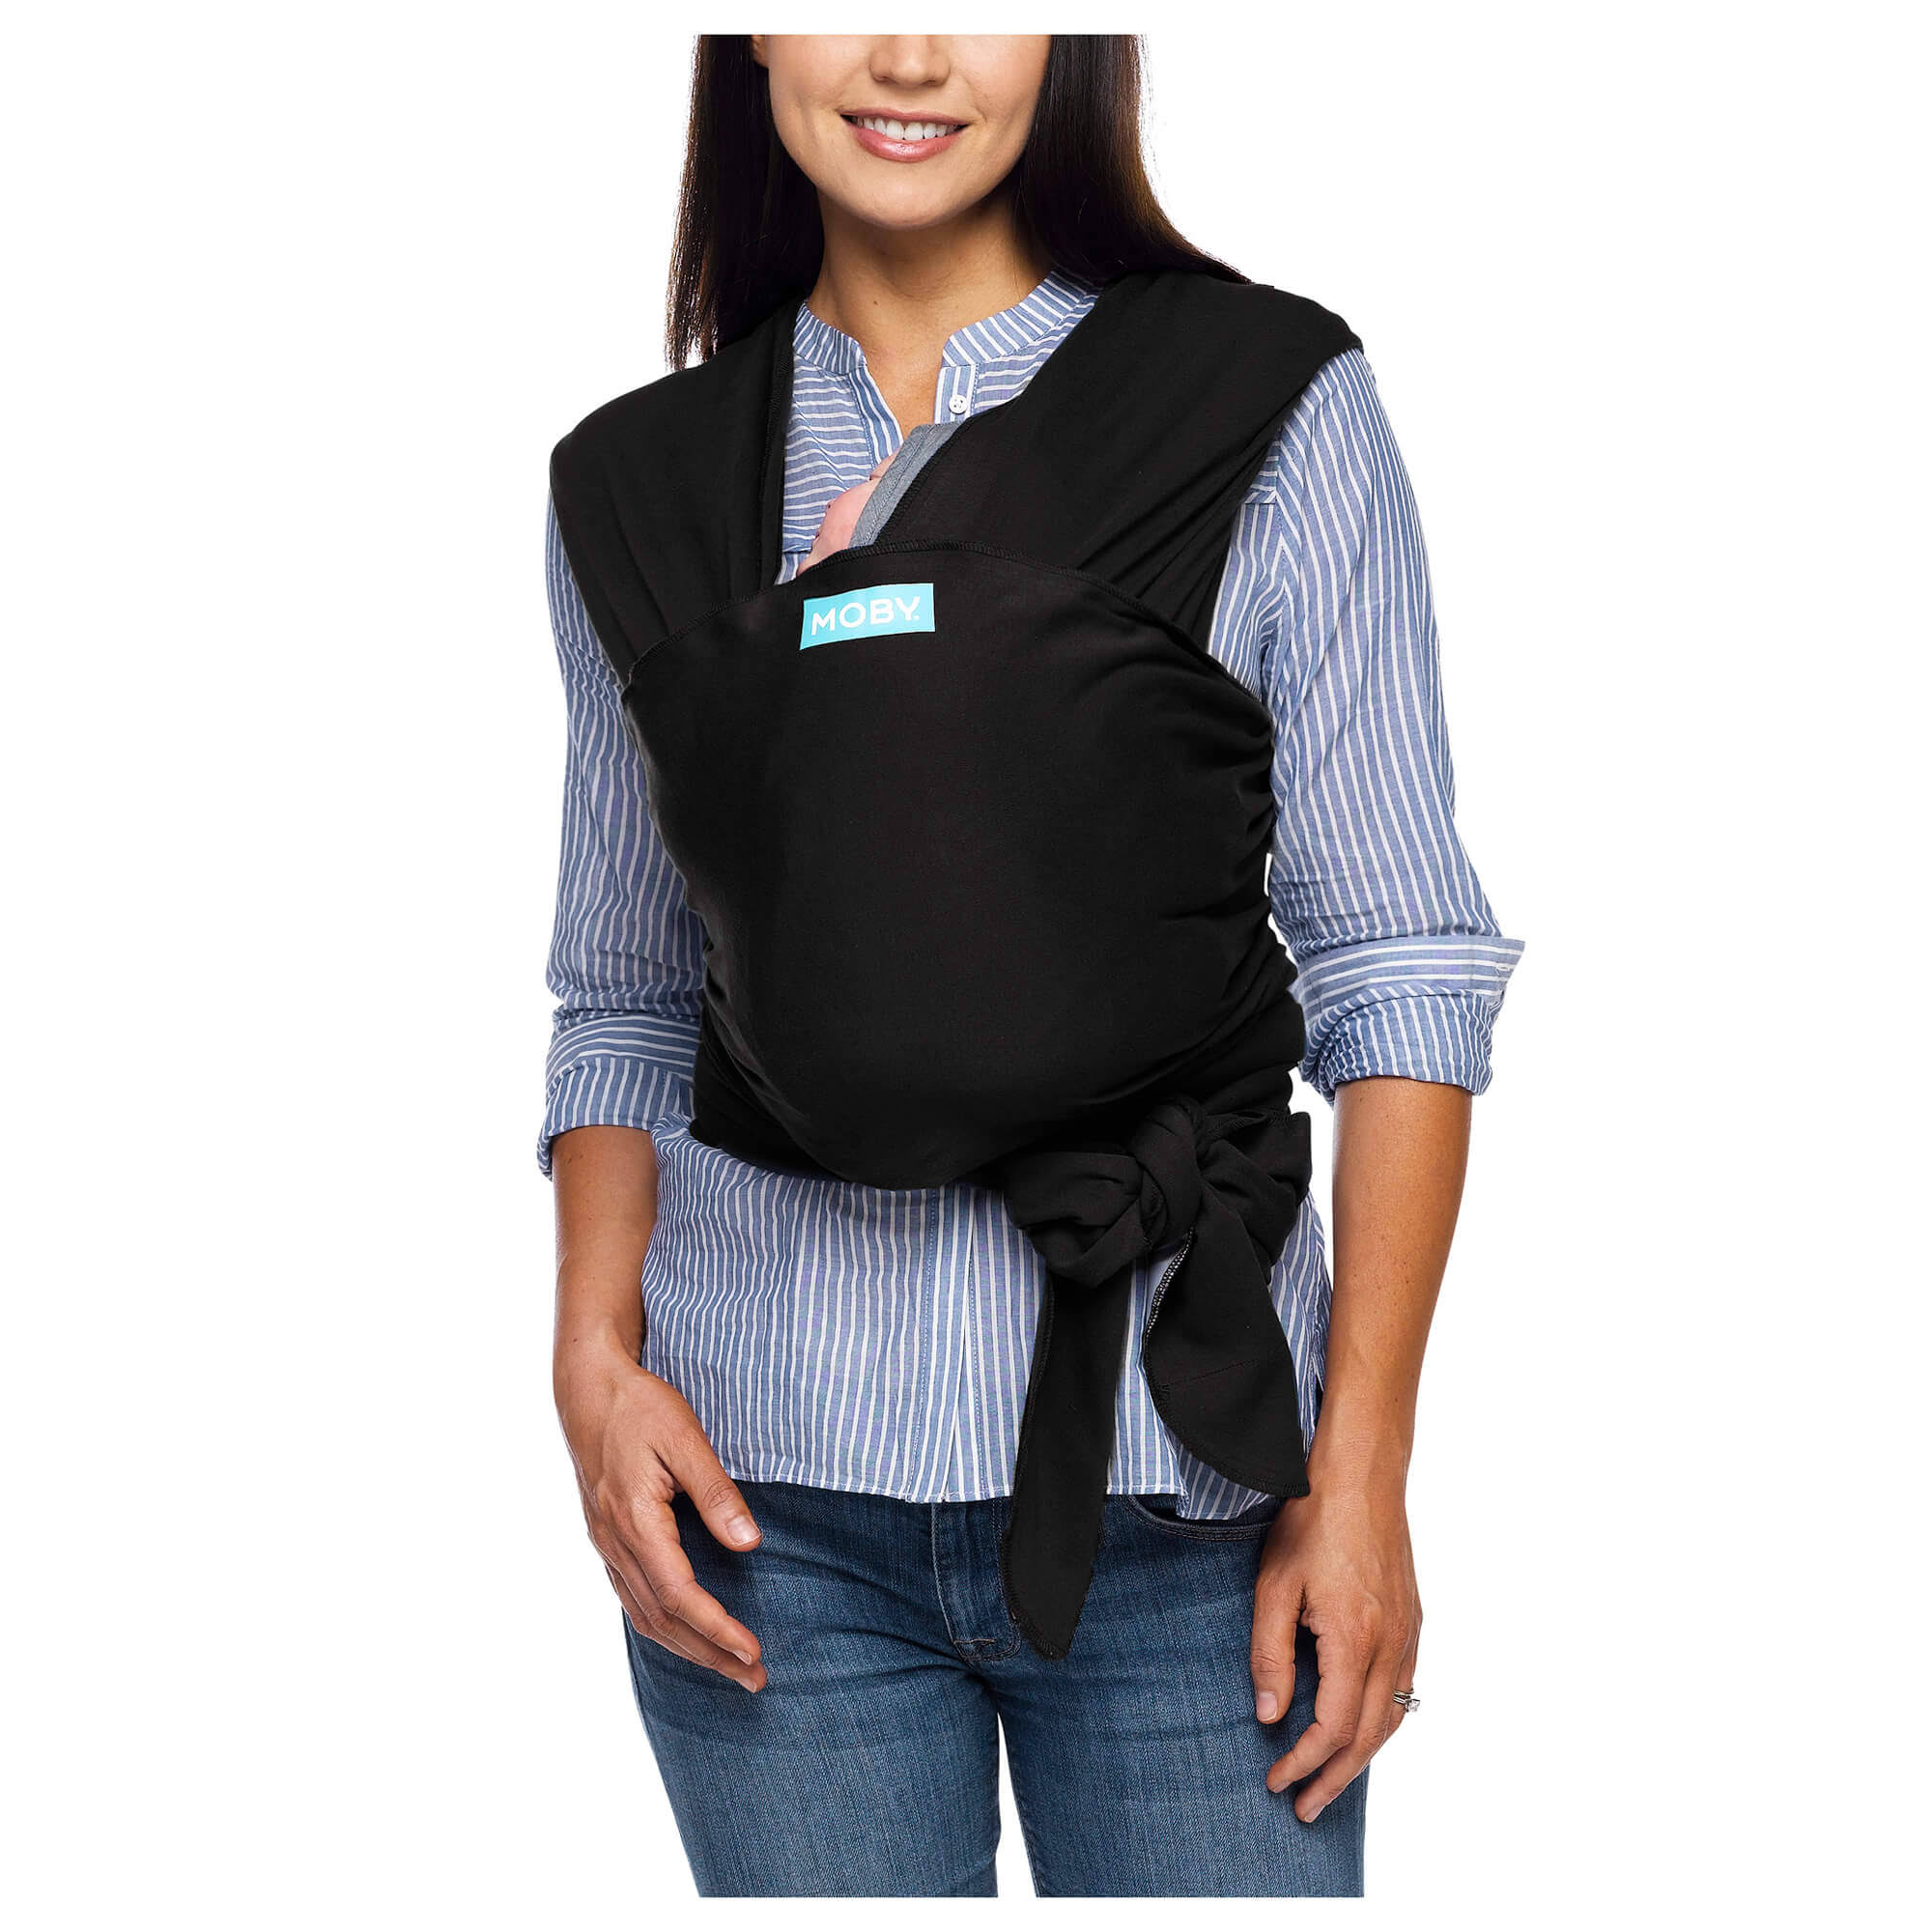 Moby Wrap Evolution Baby Carrier - Black